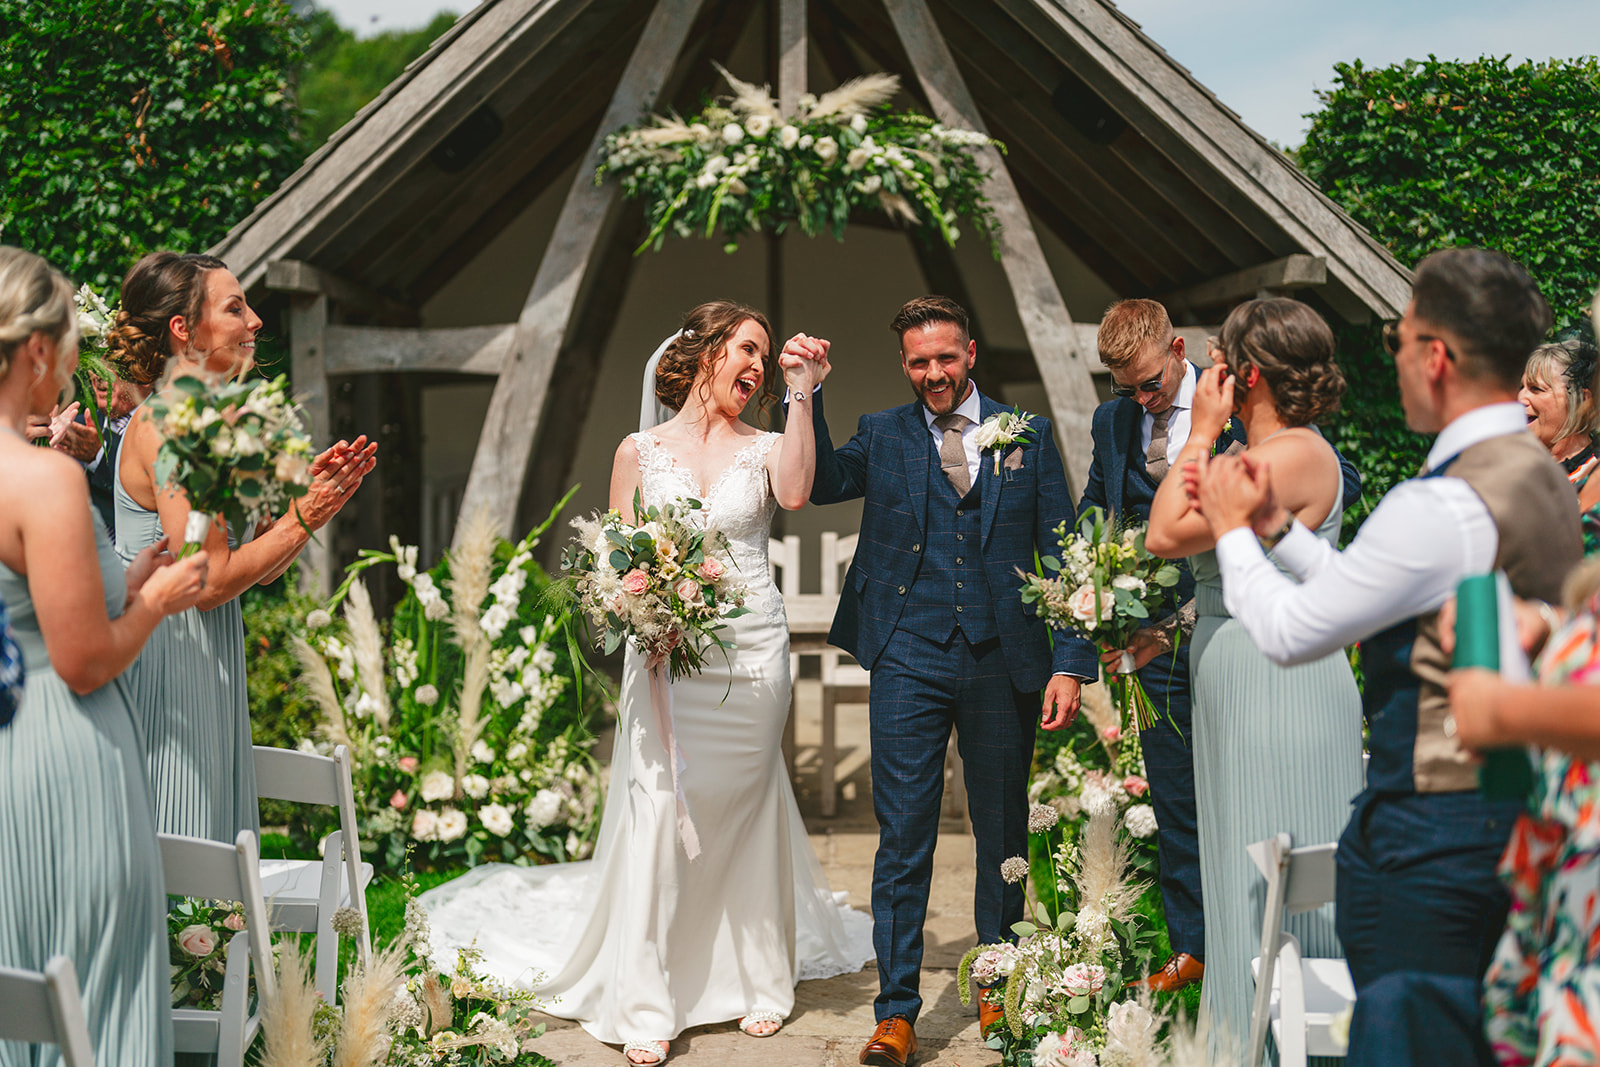 A bride and groom have their Kingscote barn wedding ceremony as they walk down the aisle.